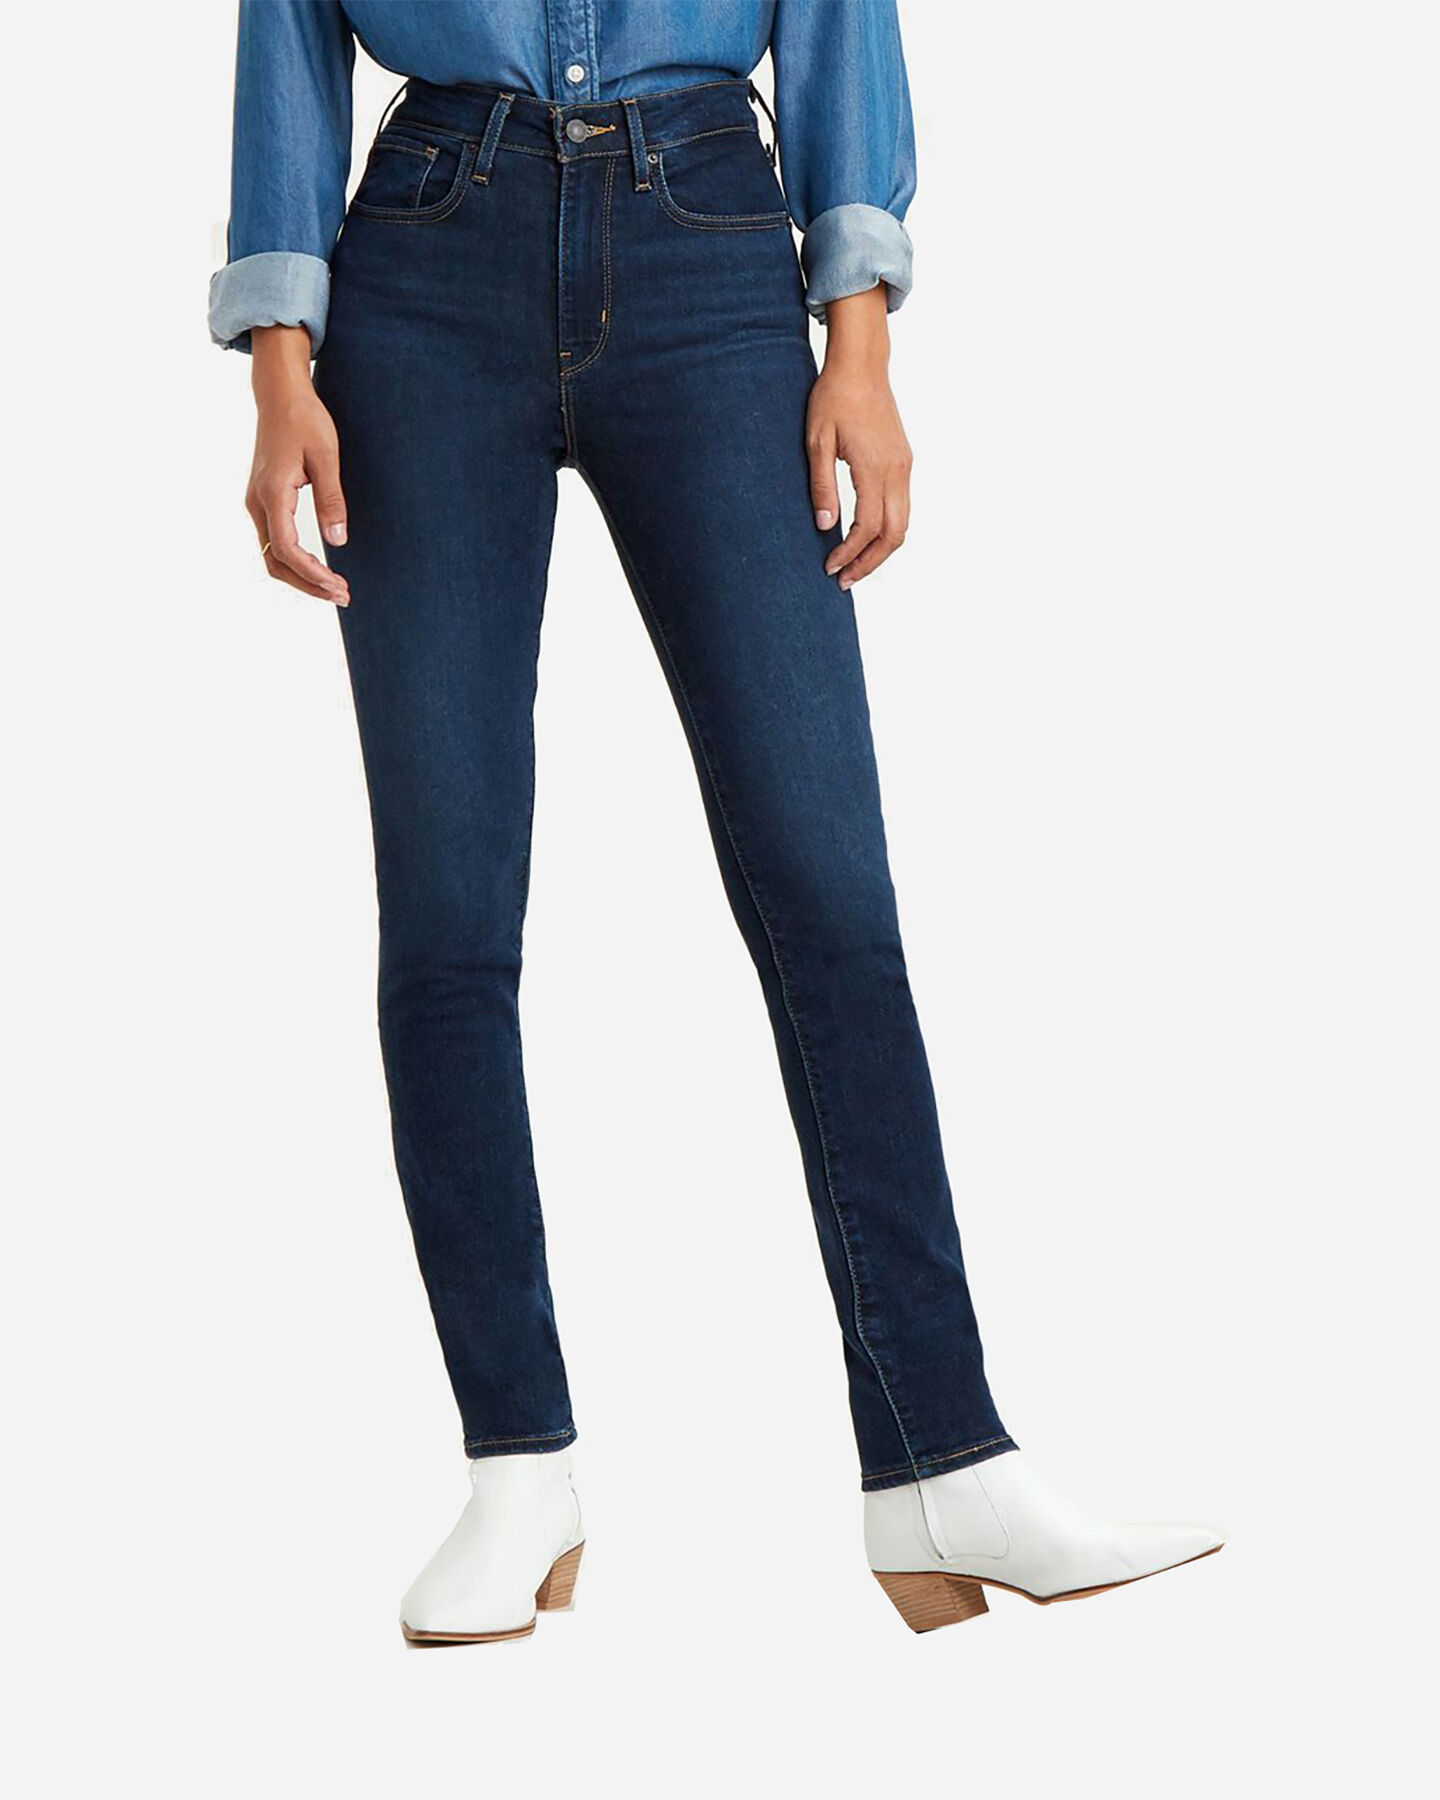  Jeans LEVI'S 721 HIGH RISE SKINNY  W S4097258 scatto 0